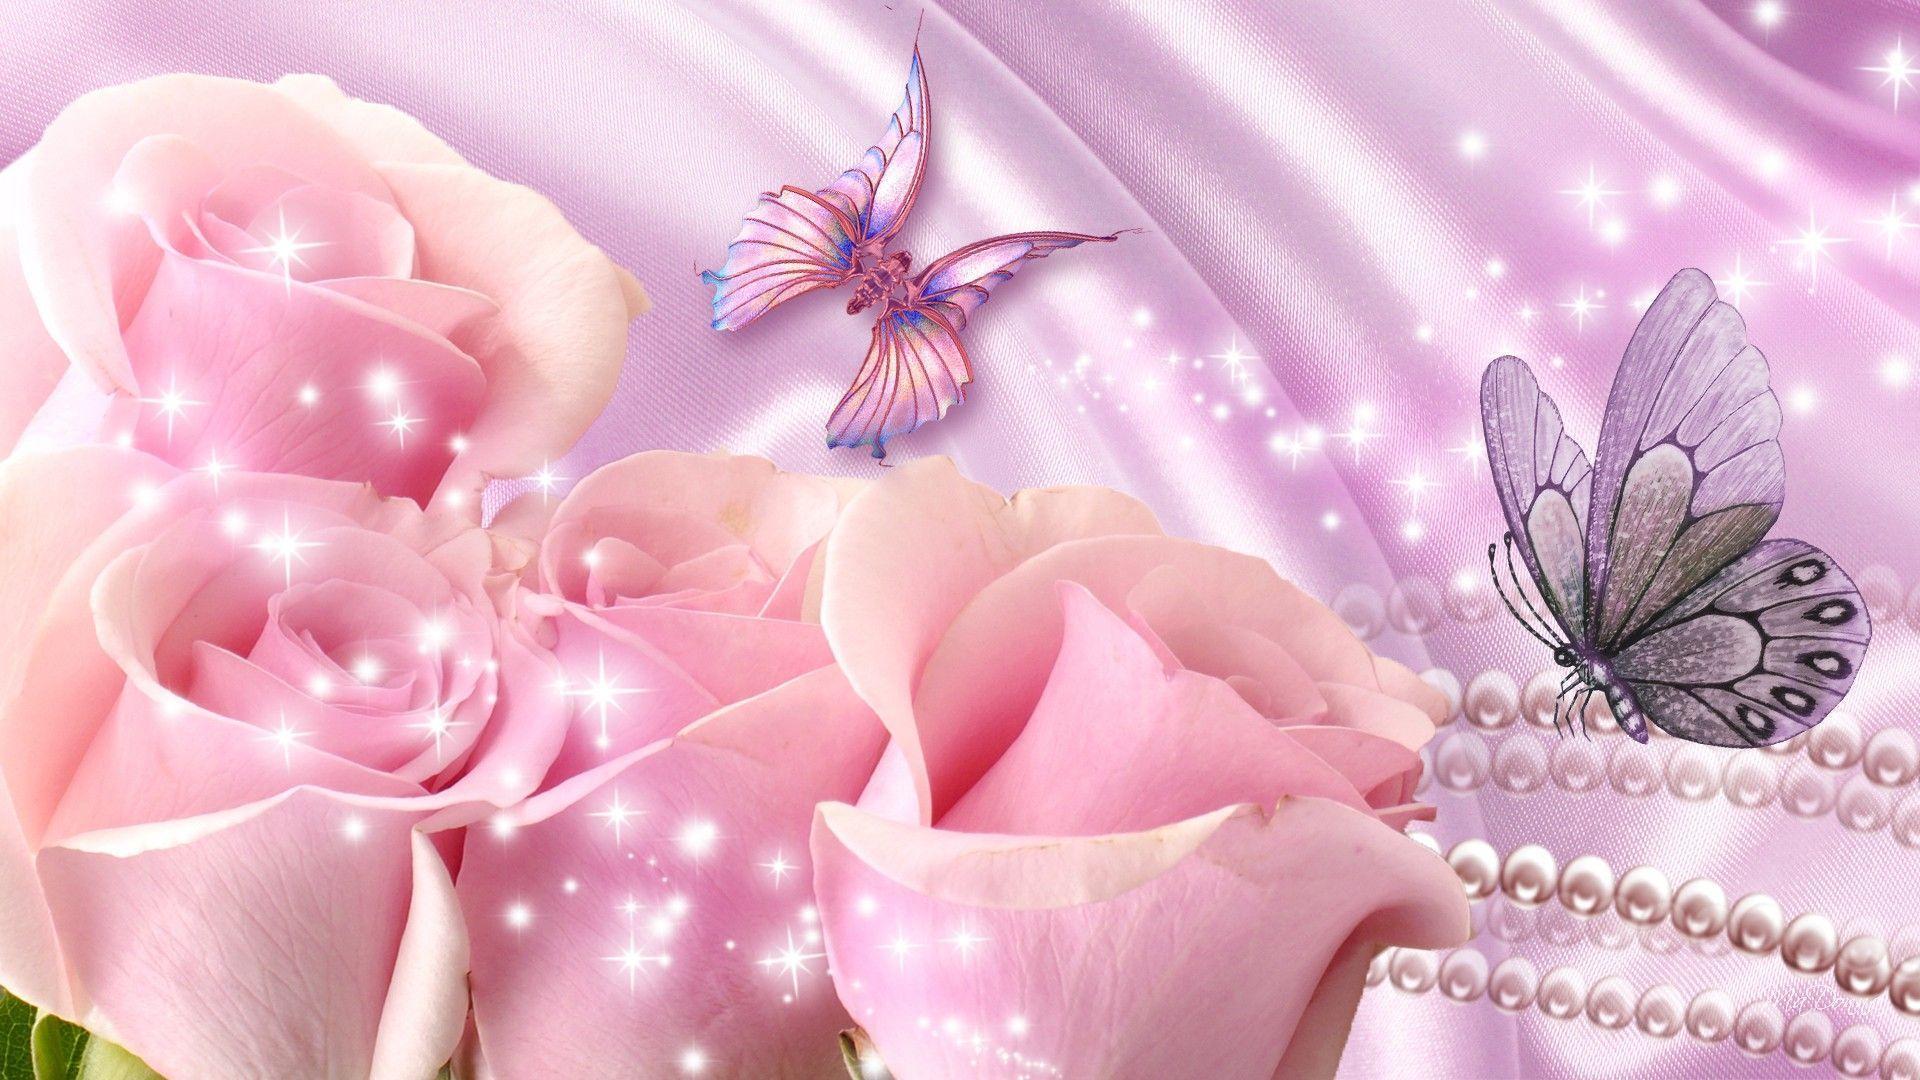 Wallpaper For > Pink Roses And Butterflies Wallpaper